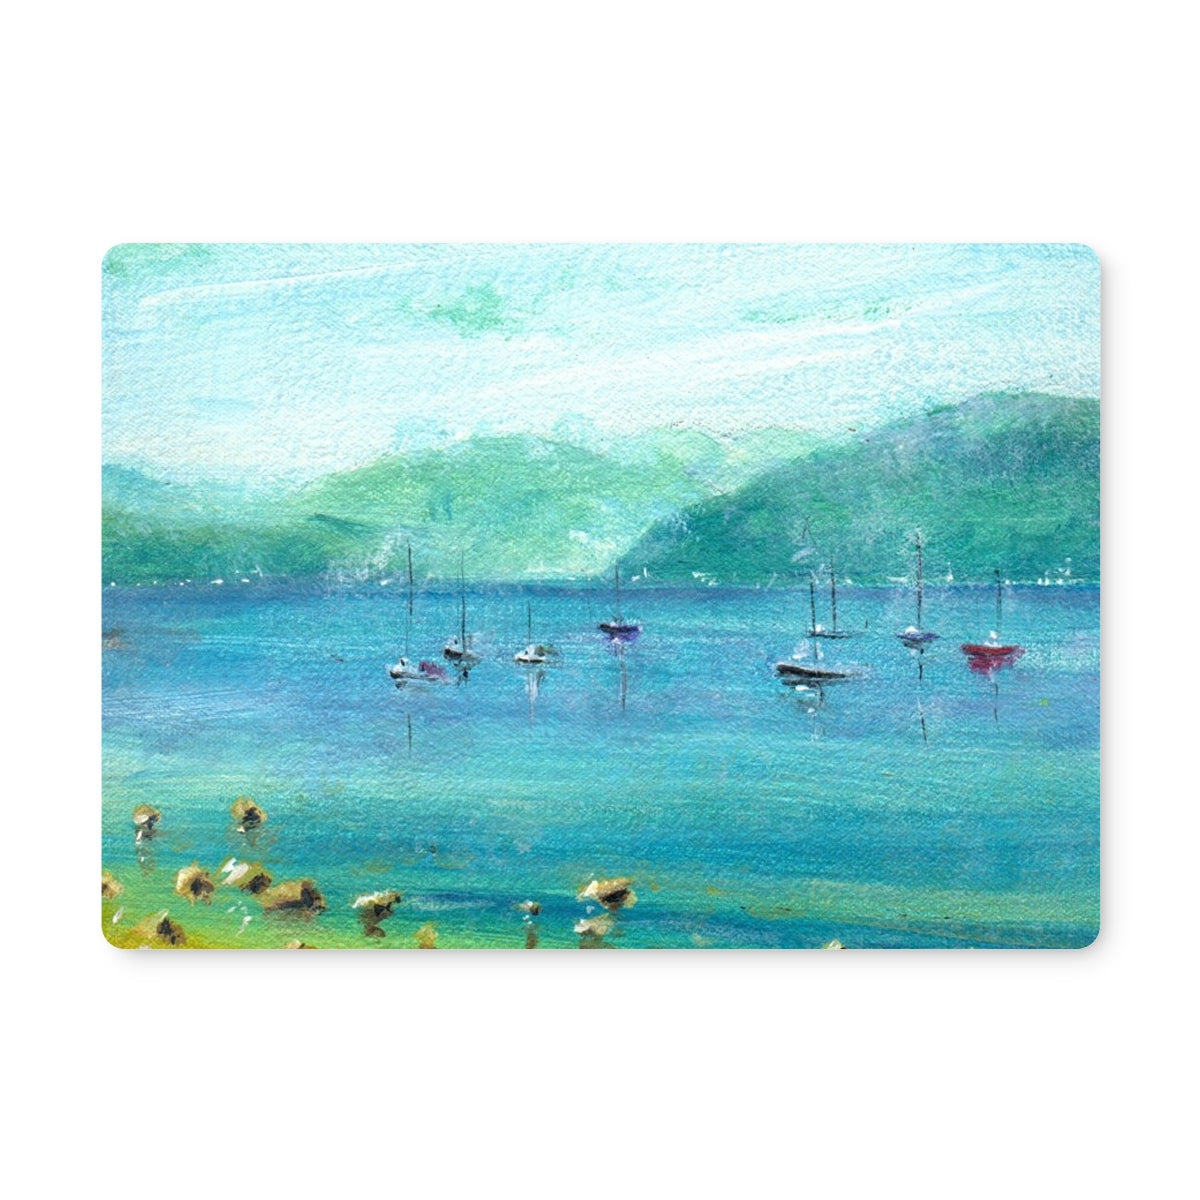 A Clyde Summer Day Art Gifts Placemat